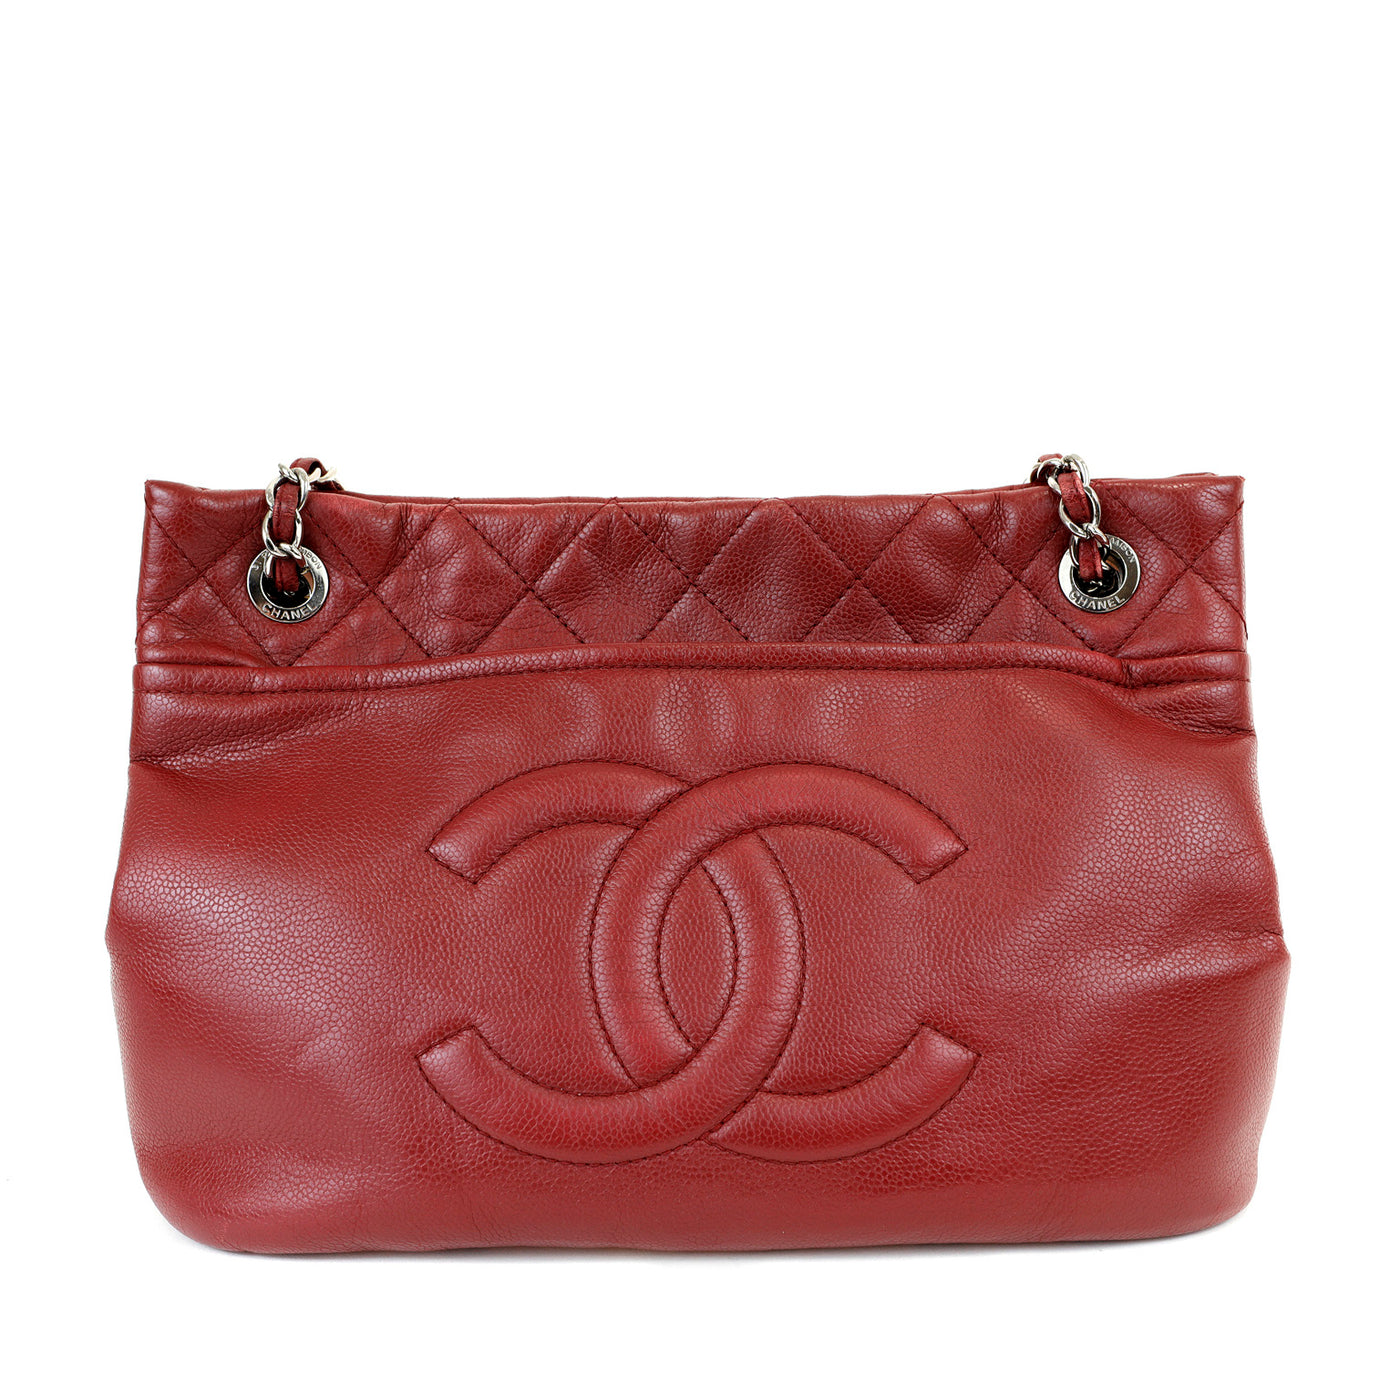 Chanel Red Caviar Leather Tote with Silver Hardware